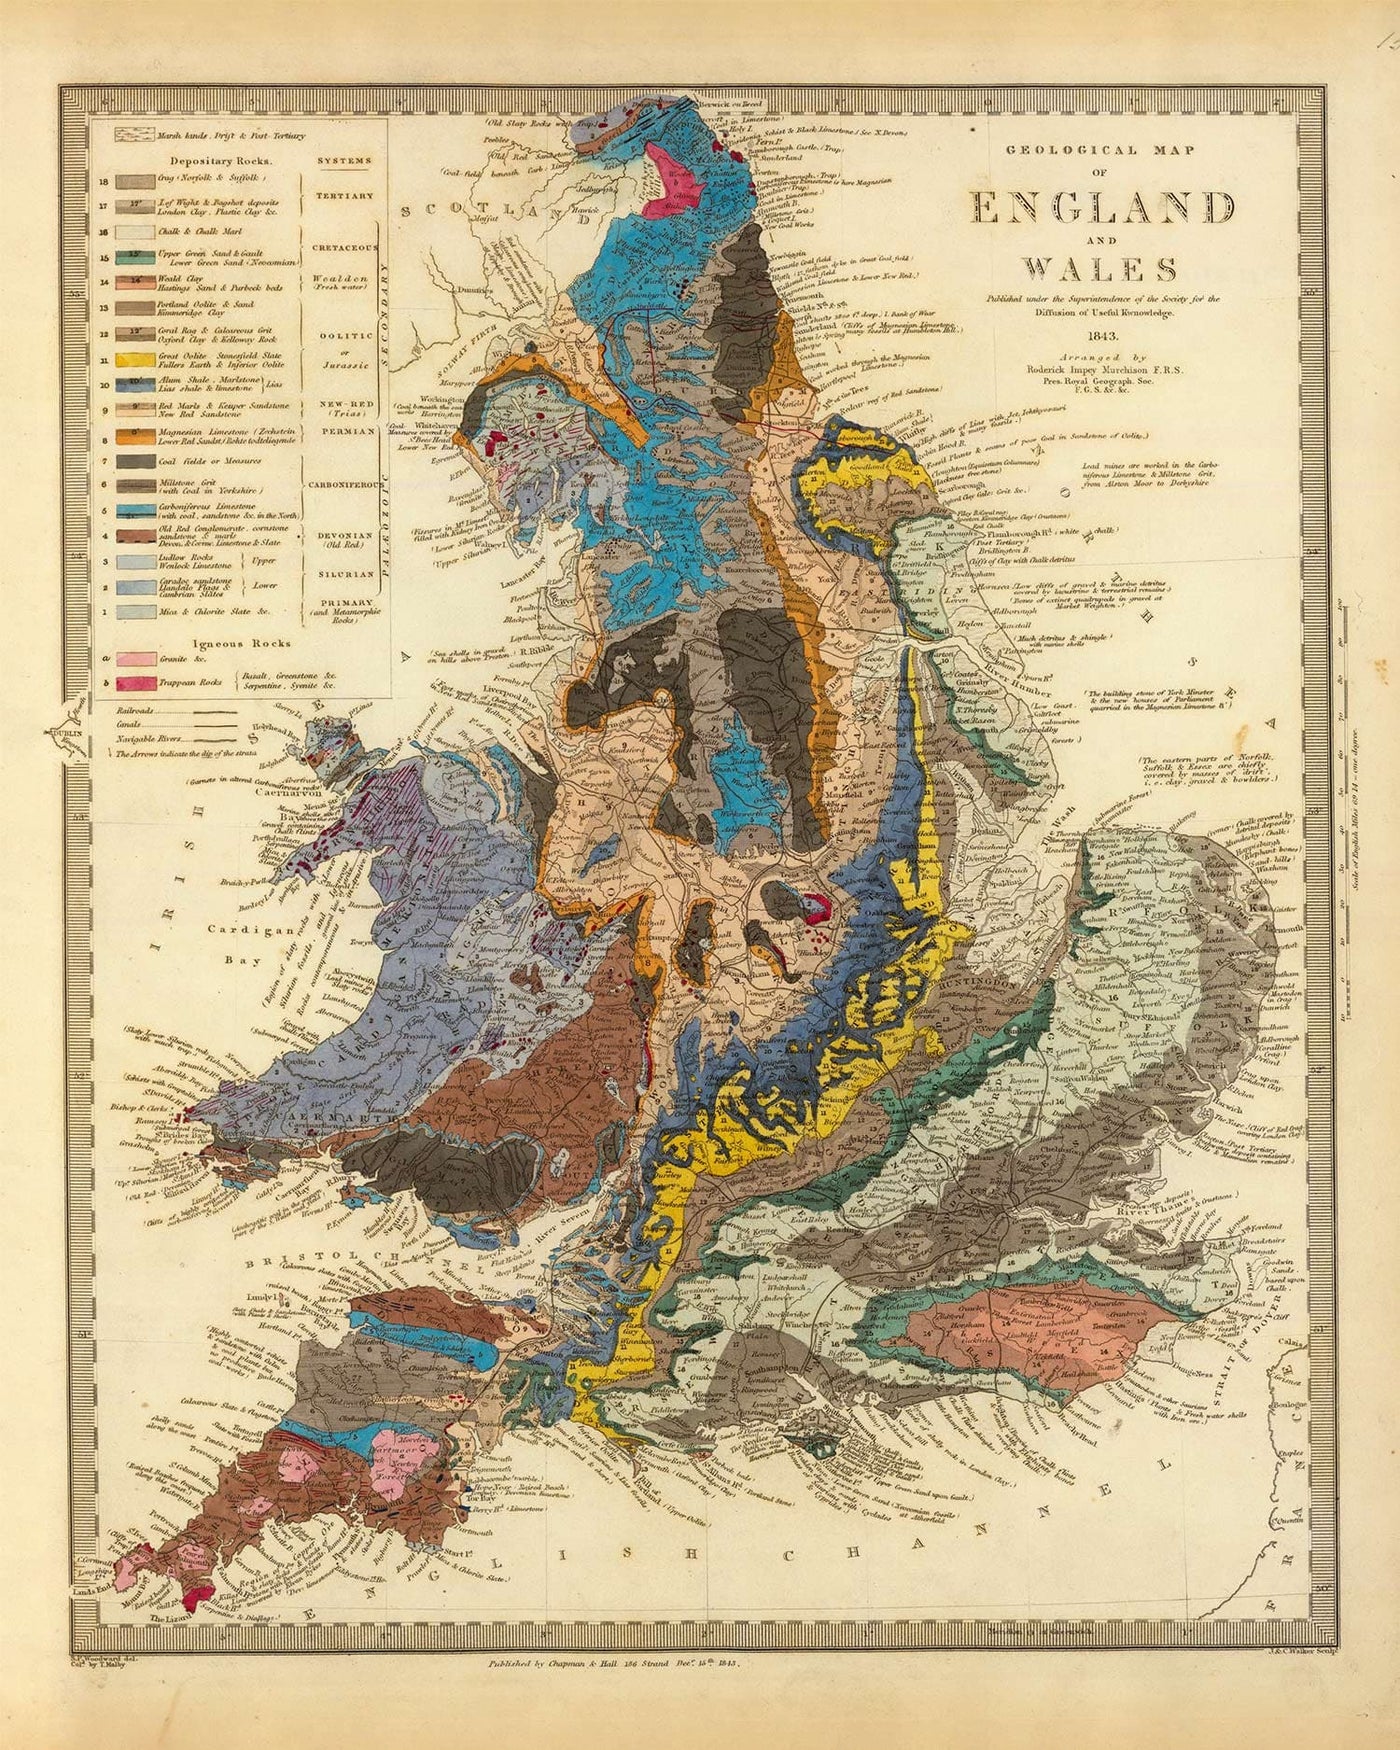 England Face Mask / Neck Gaiter - with vintage geological map of England & Wales by Roderick Impey Murchison, 1843